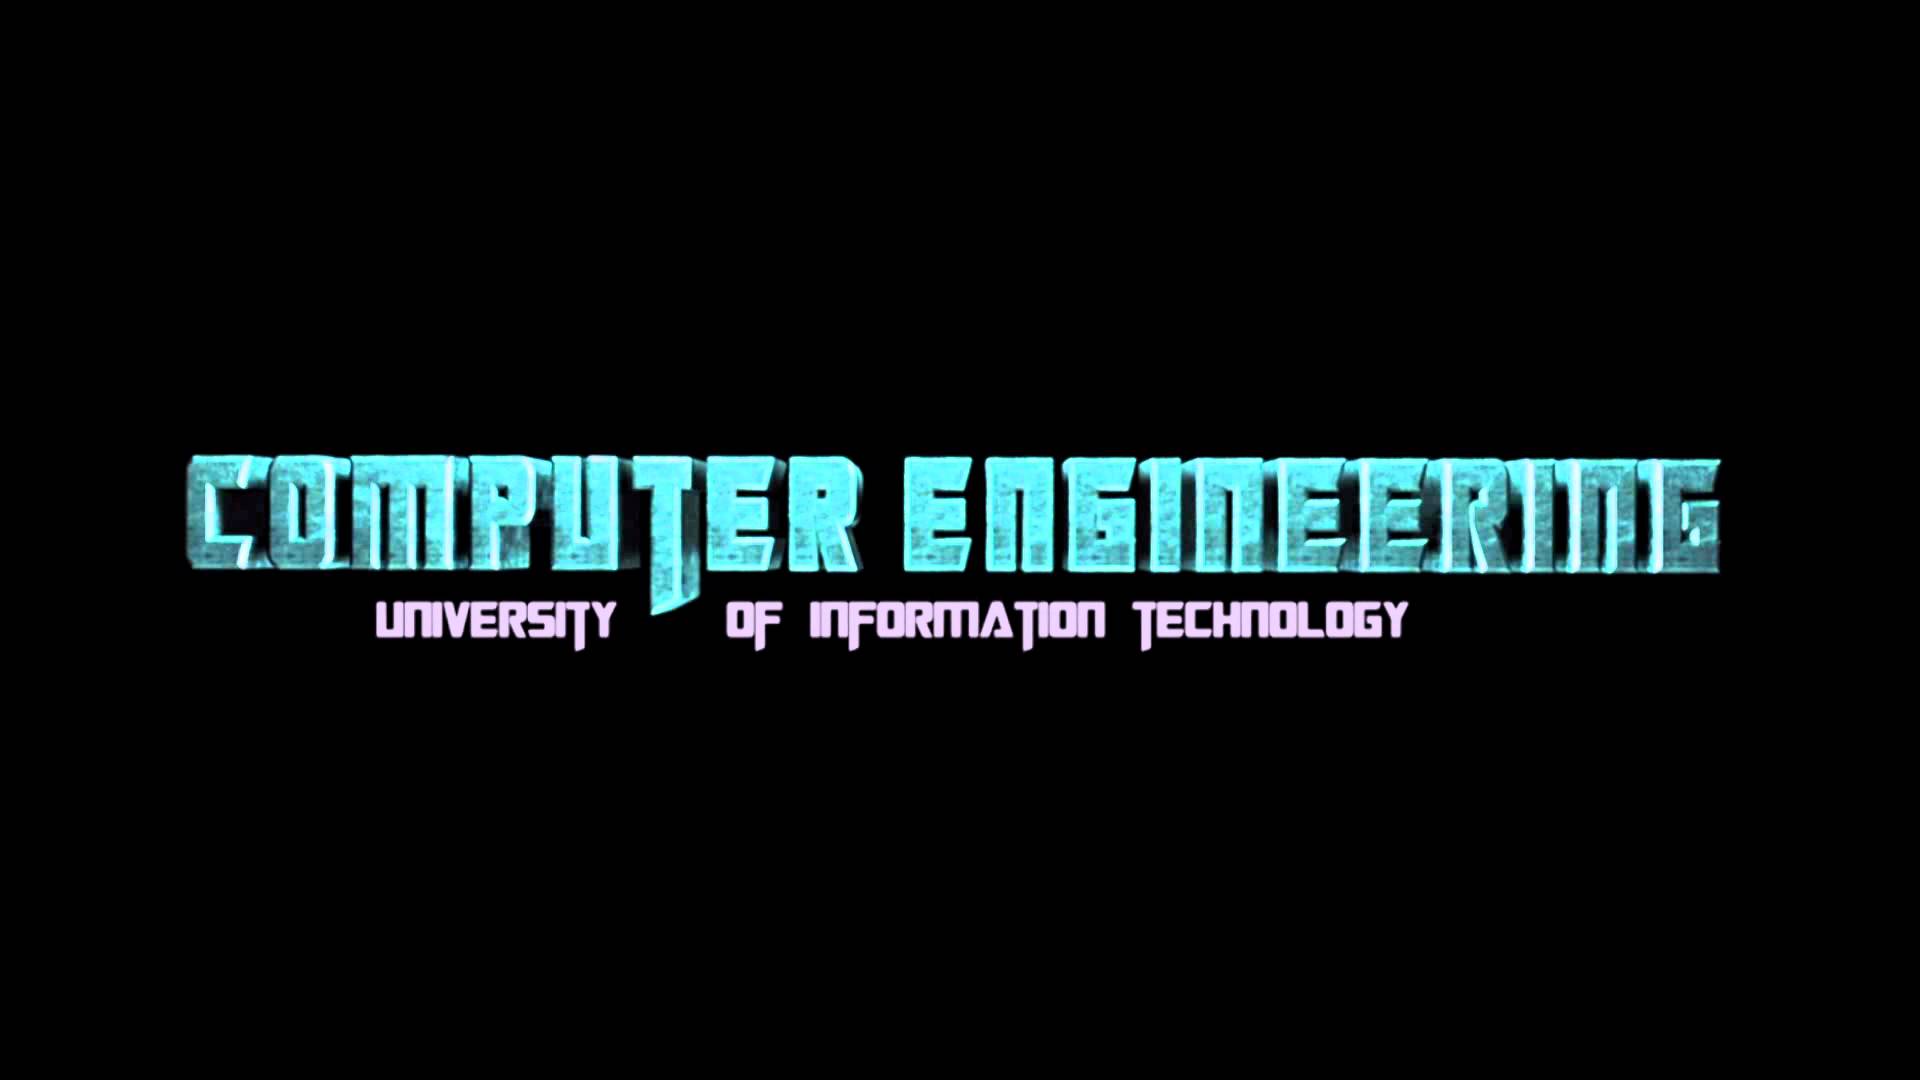 Page 4  Computer Engineering Images  Free Download on Freepik